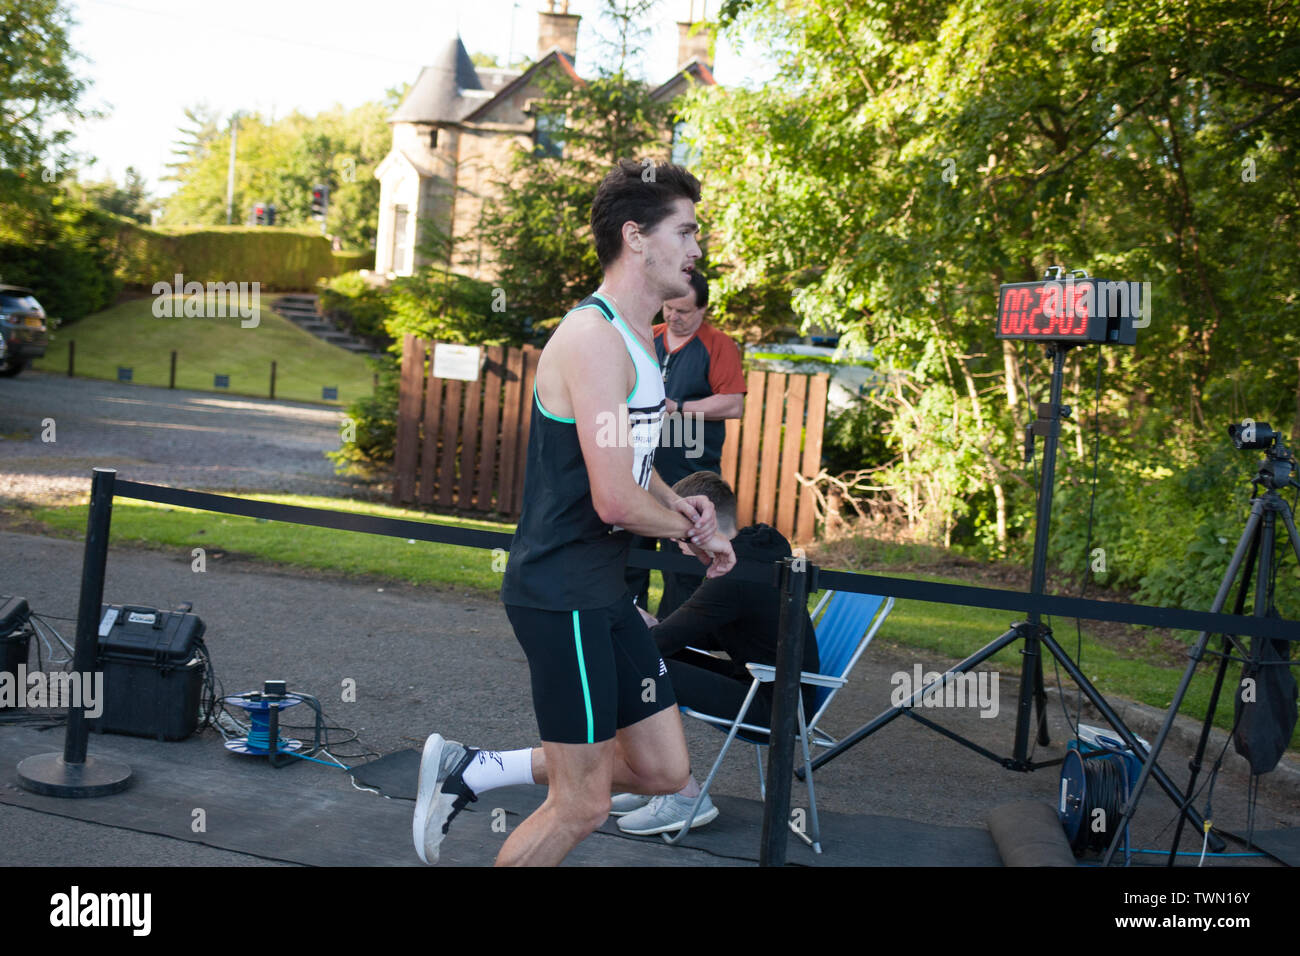 Glasgow, Scotland. 21st June, 2019. The Brian Goodwin Memorial 10km road race, hosted by Bellahouston Harriers running club, and held in Glasgow's scenic Pollok Country Park, was tonight won by Olympian Callum Hawkins in a time of 29minutes 06secs. (Hawkins, pictured, wears Bib 199, Kilbarchan AAC); 2nd male was Jamie Crow (Bib 108, Central AC)) with a Personal Best time of 29min 43sec, and 3rd male was James Donald (30:11, Bib 130, Dundee Hawkhill Harriers).  Credit: jeremy sutton-hibbert/Alamy Live News Stock Photo